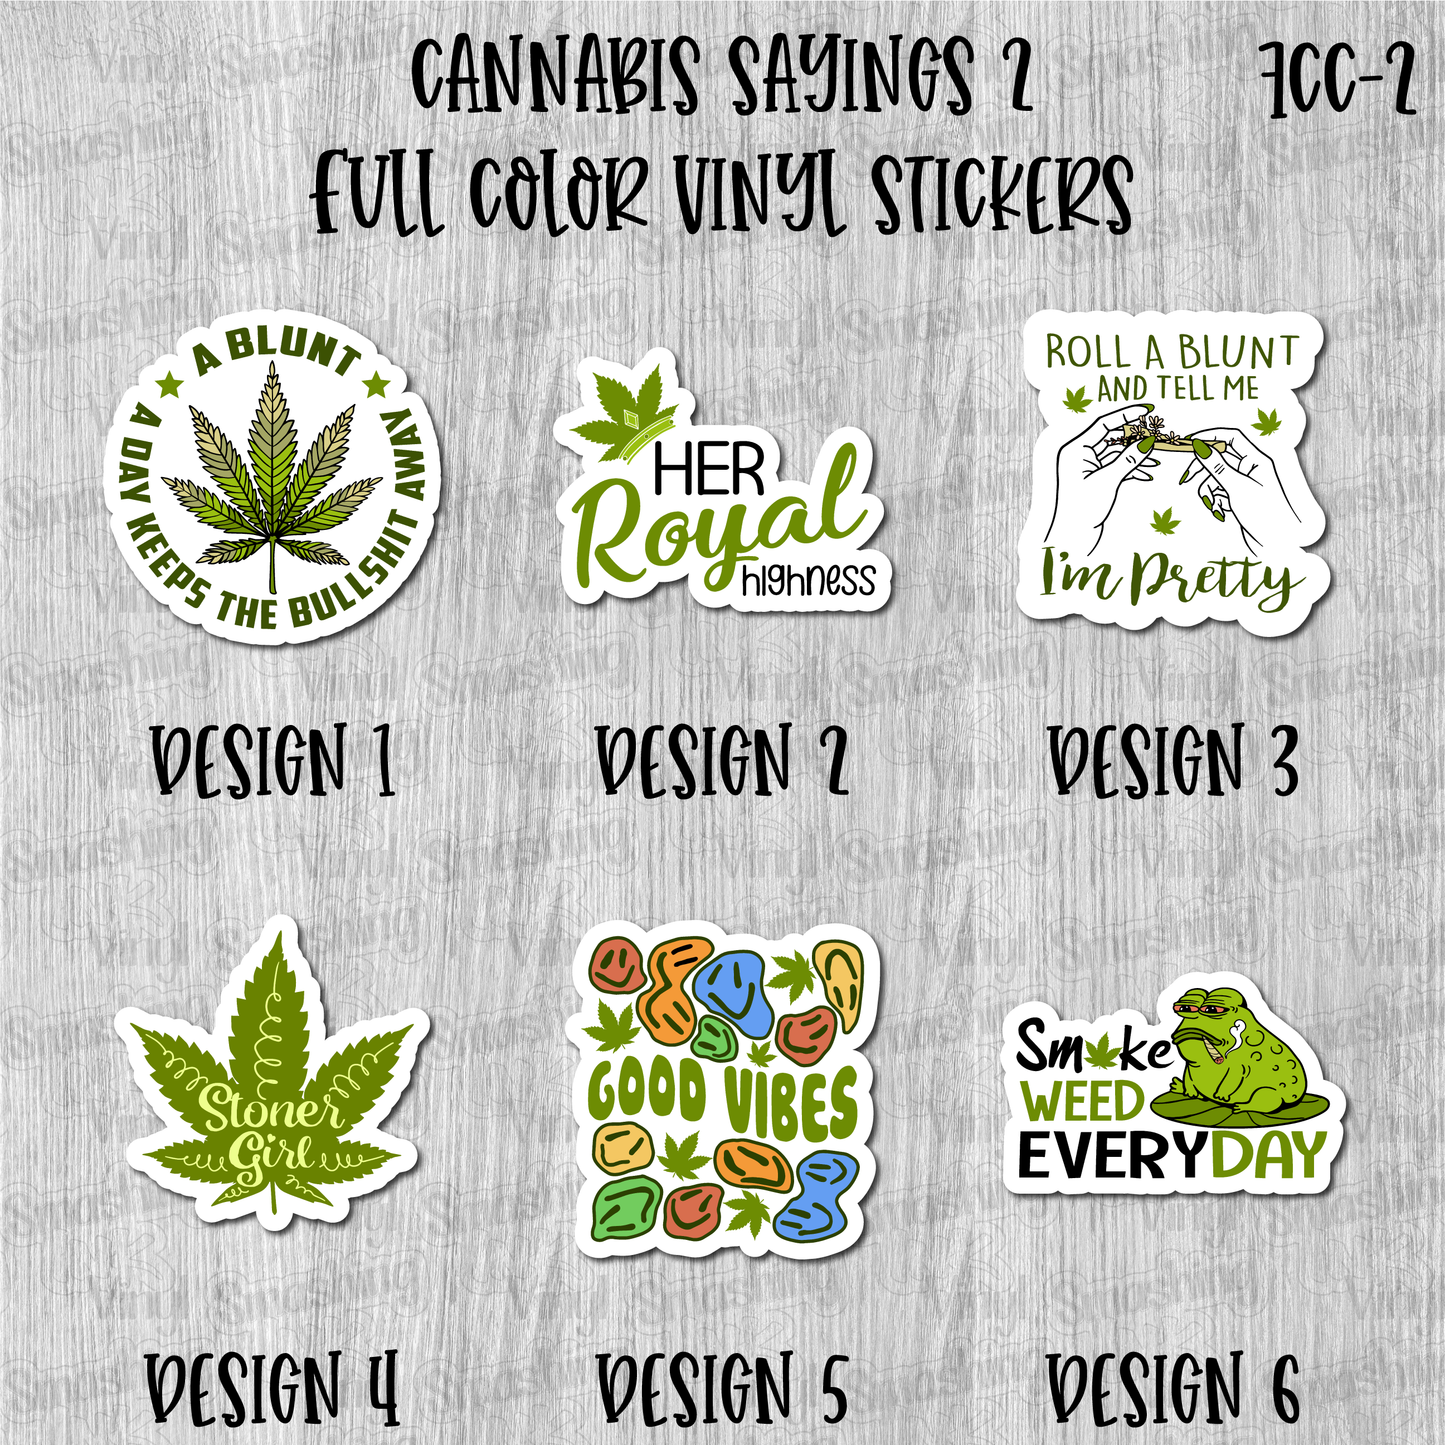 Cannabis Sayings 2 - Full Color Vinyl Stickers (SHIPS IN 3-7 BUS DAYS)